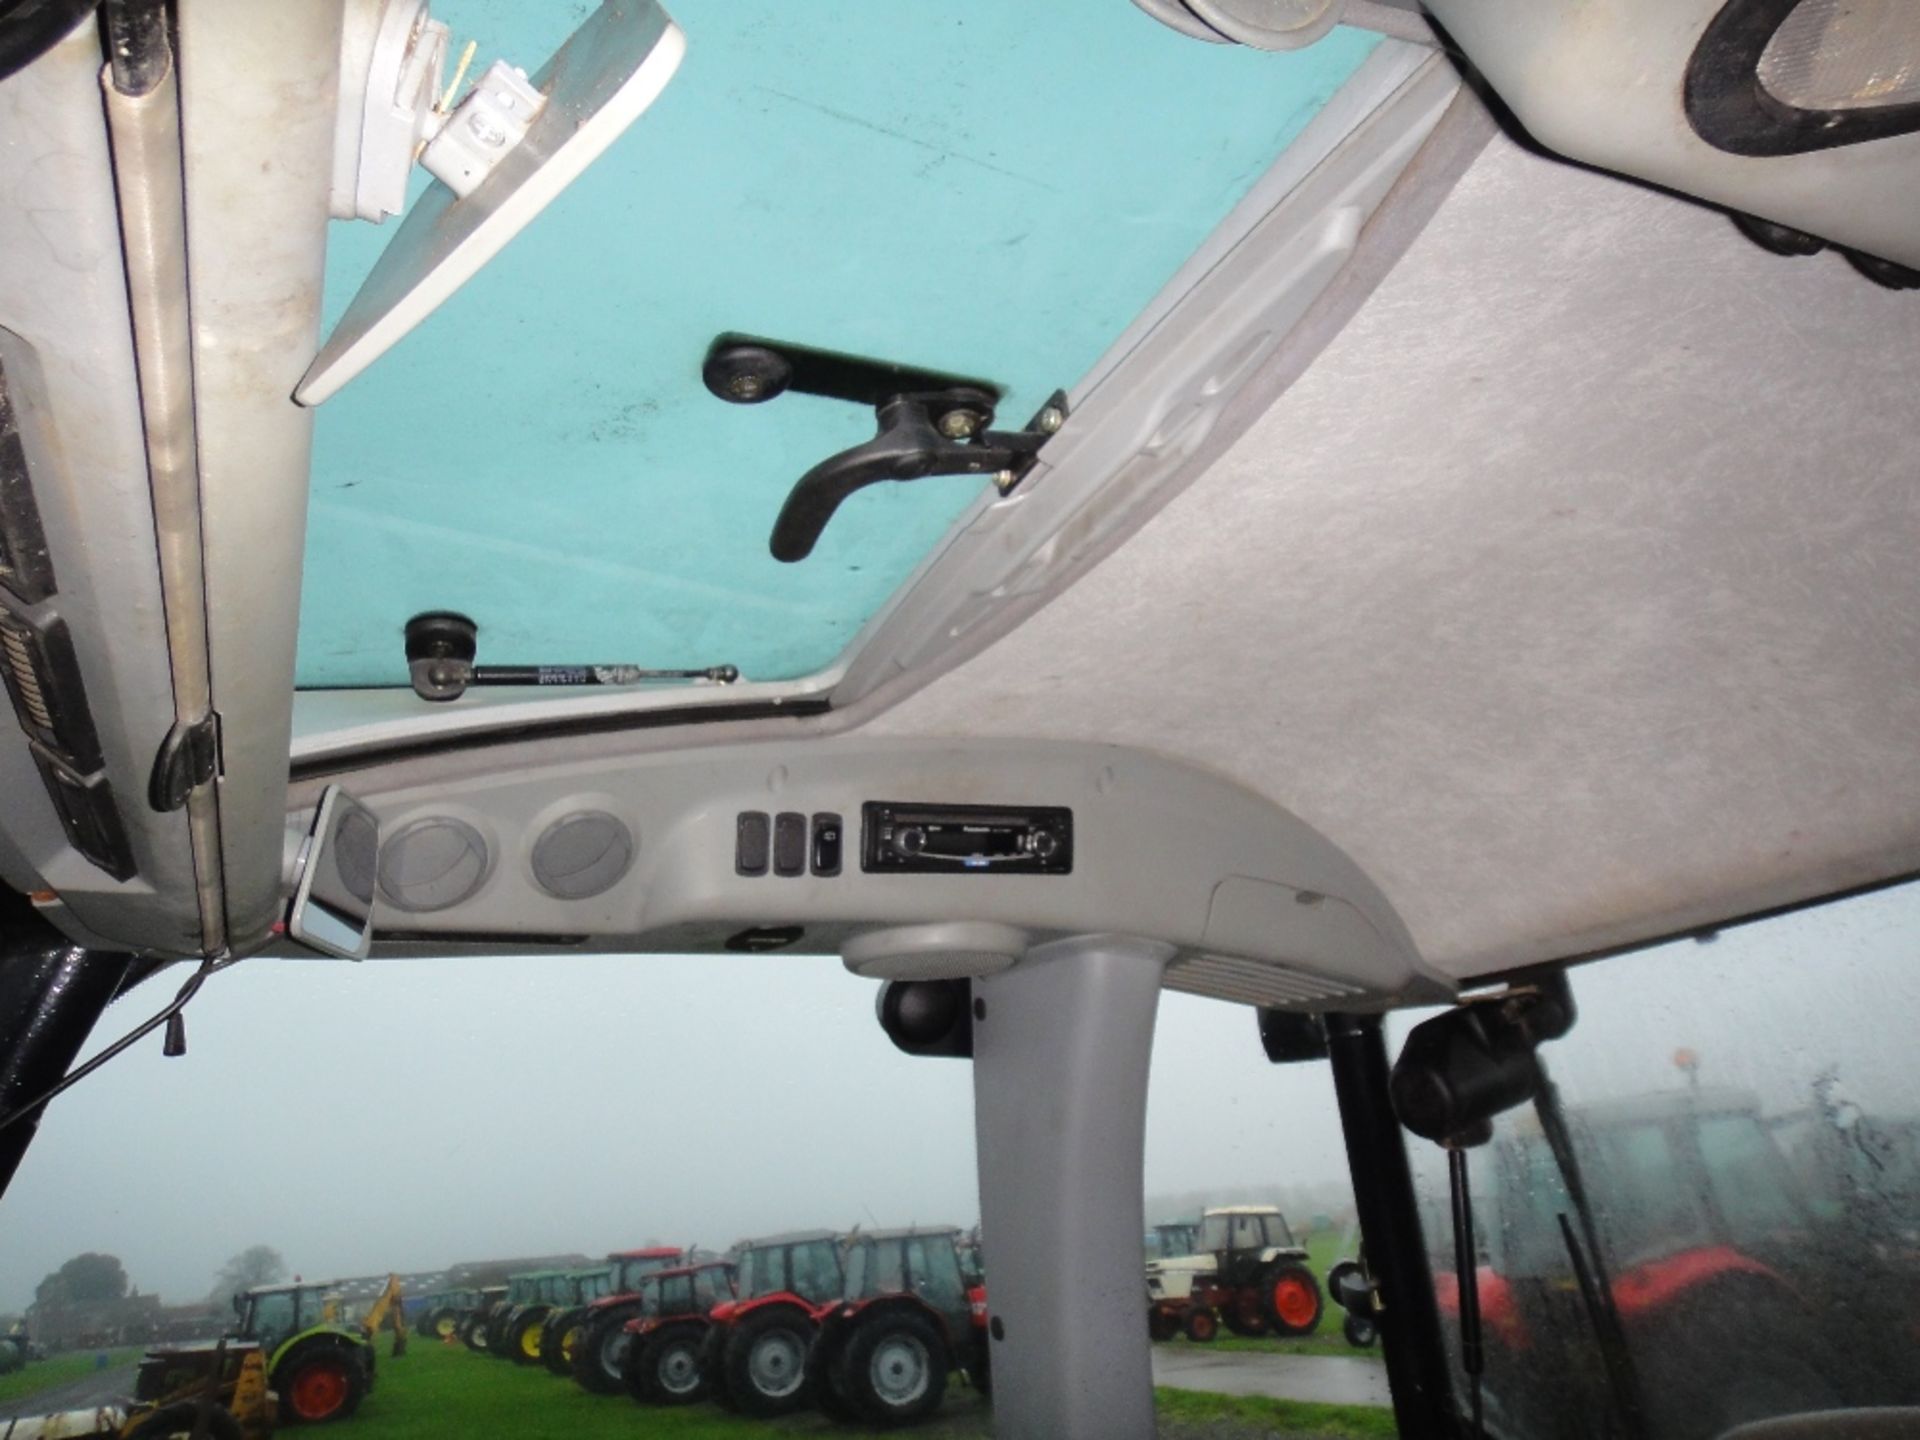 2007 Lamborghini R6120 4wd Tractor with Quickie Q45 Loader. V5 will be supplied - Image 7 of 7